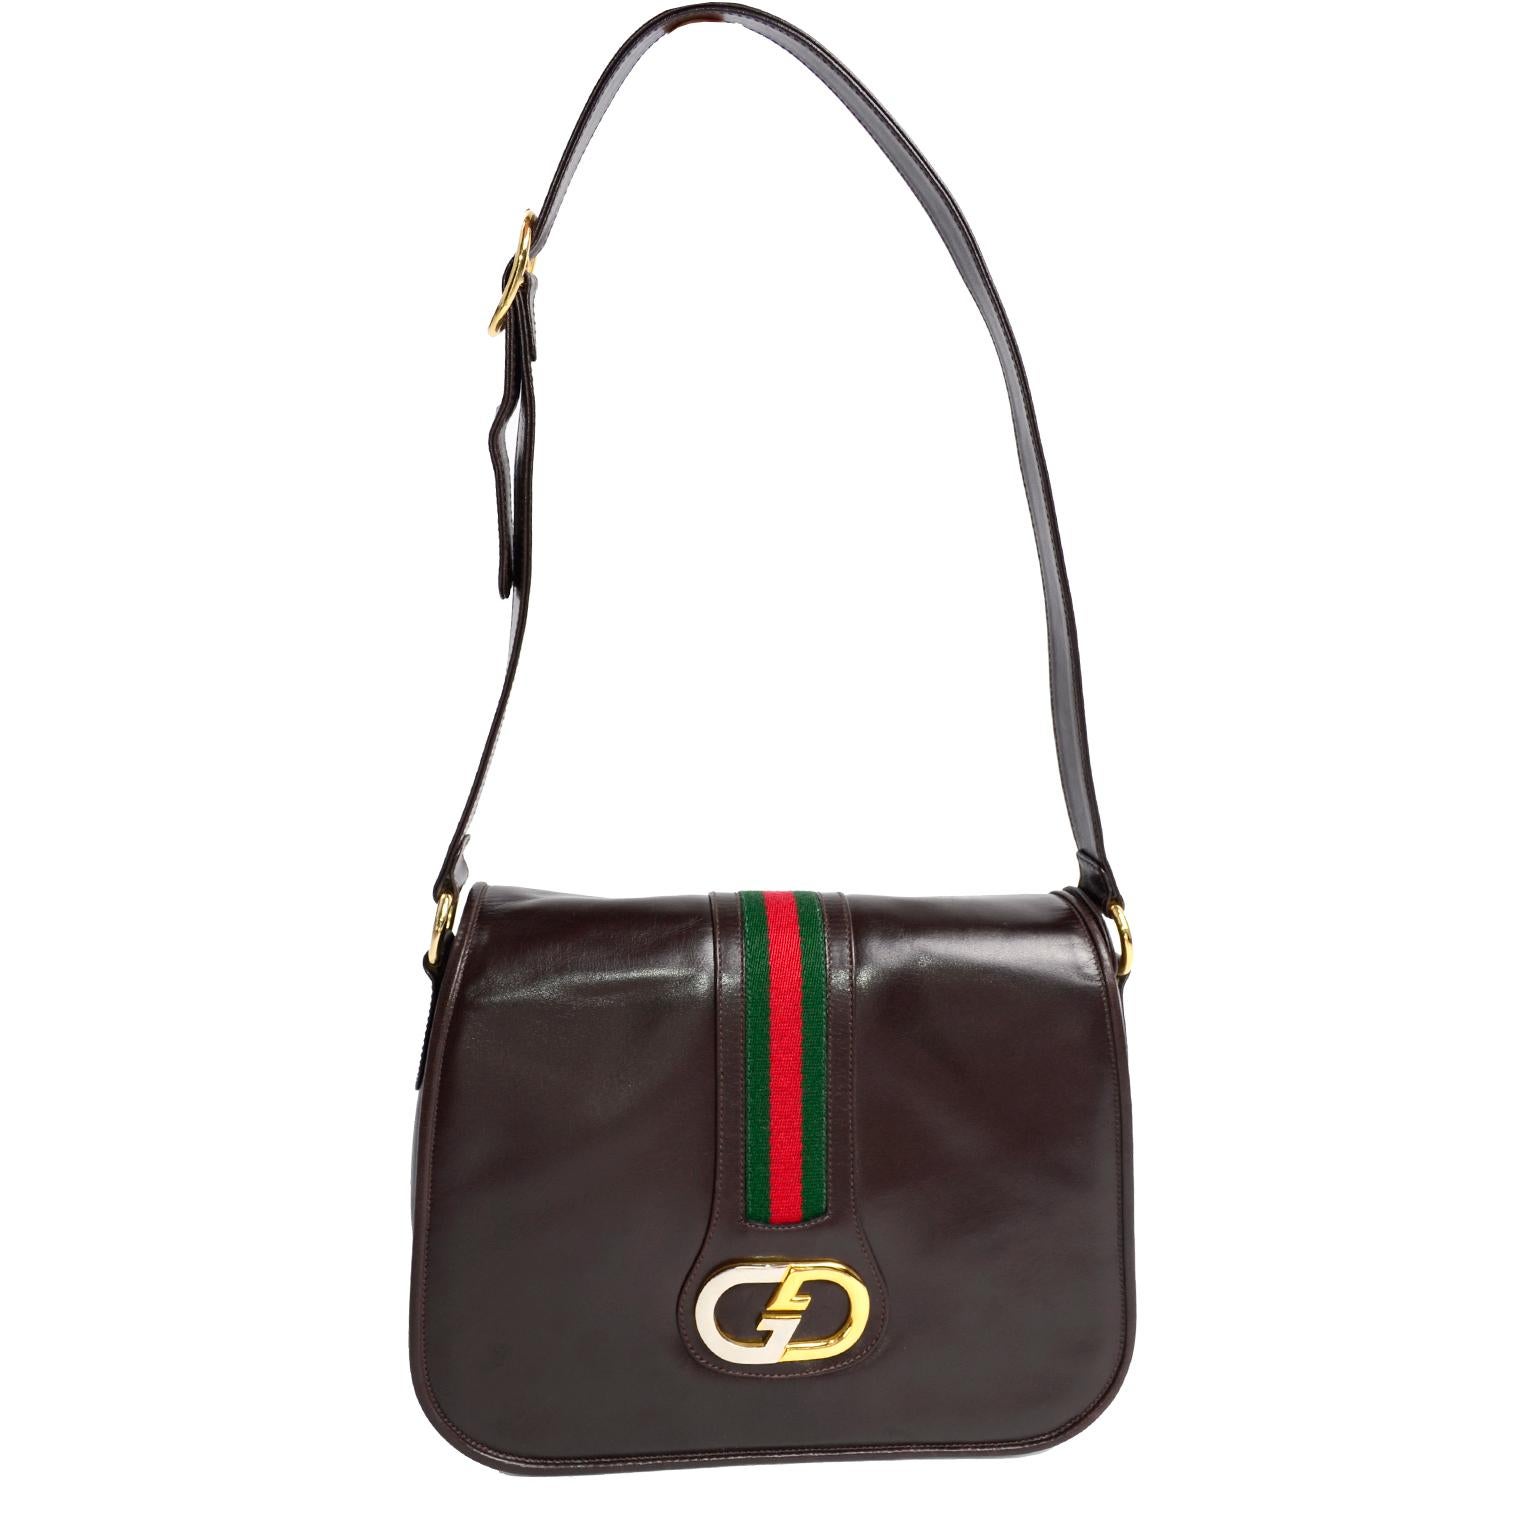 This is a classic vintage Gucci brown leather bag purchased at Joseph Magnin in 1979. This wonderful handbag still has its original tags attached and is accented with the iconic Gucci monogram buckle in silver and gold, and  Italian red and green